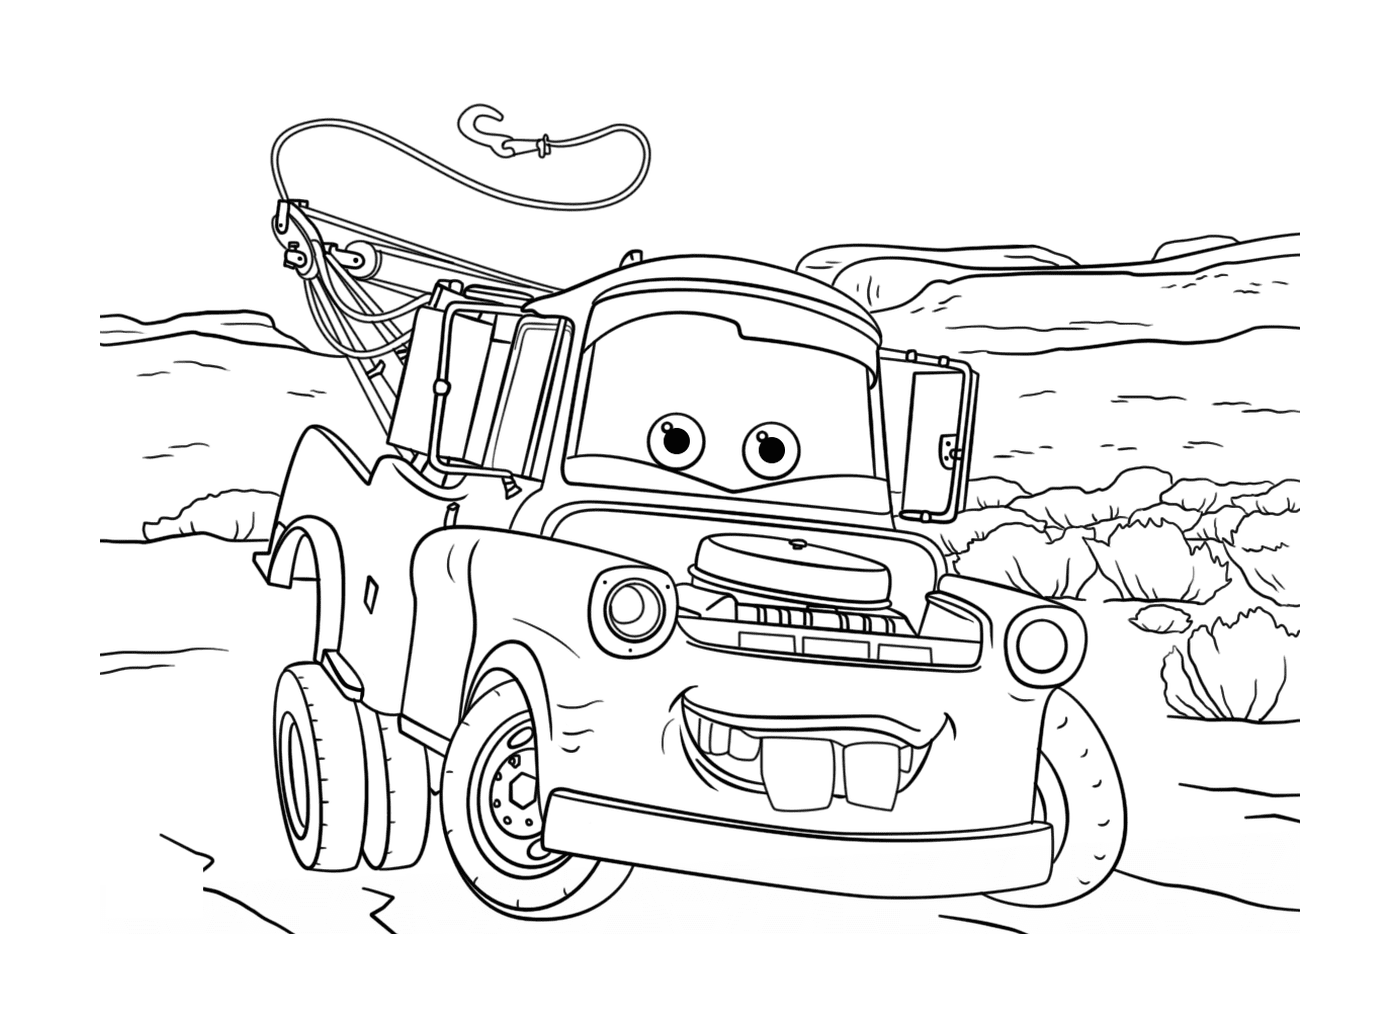 tow mater from cars 3 disney